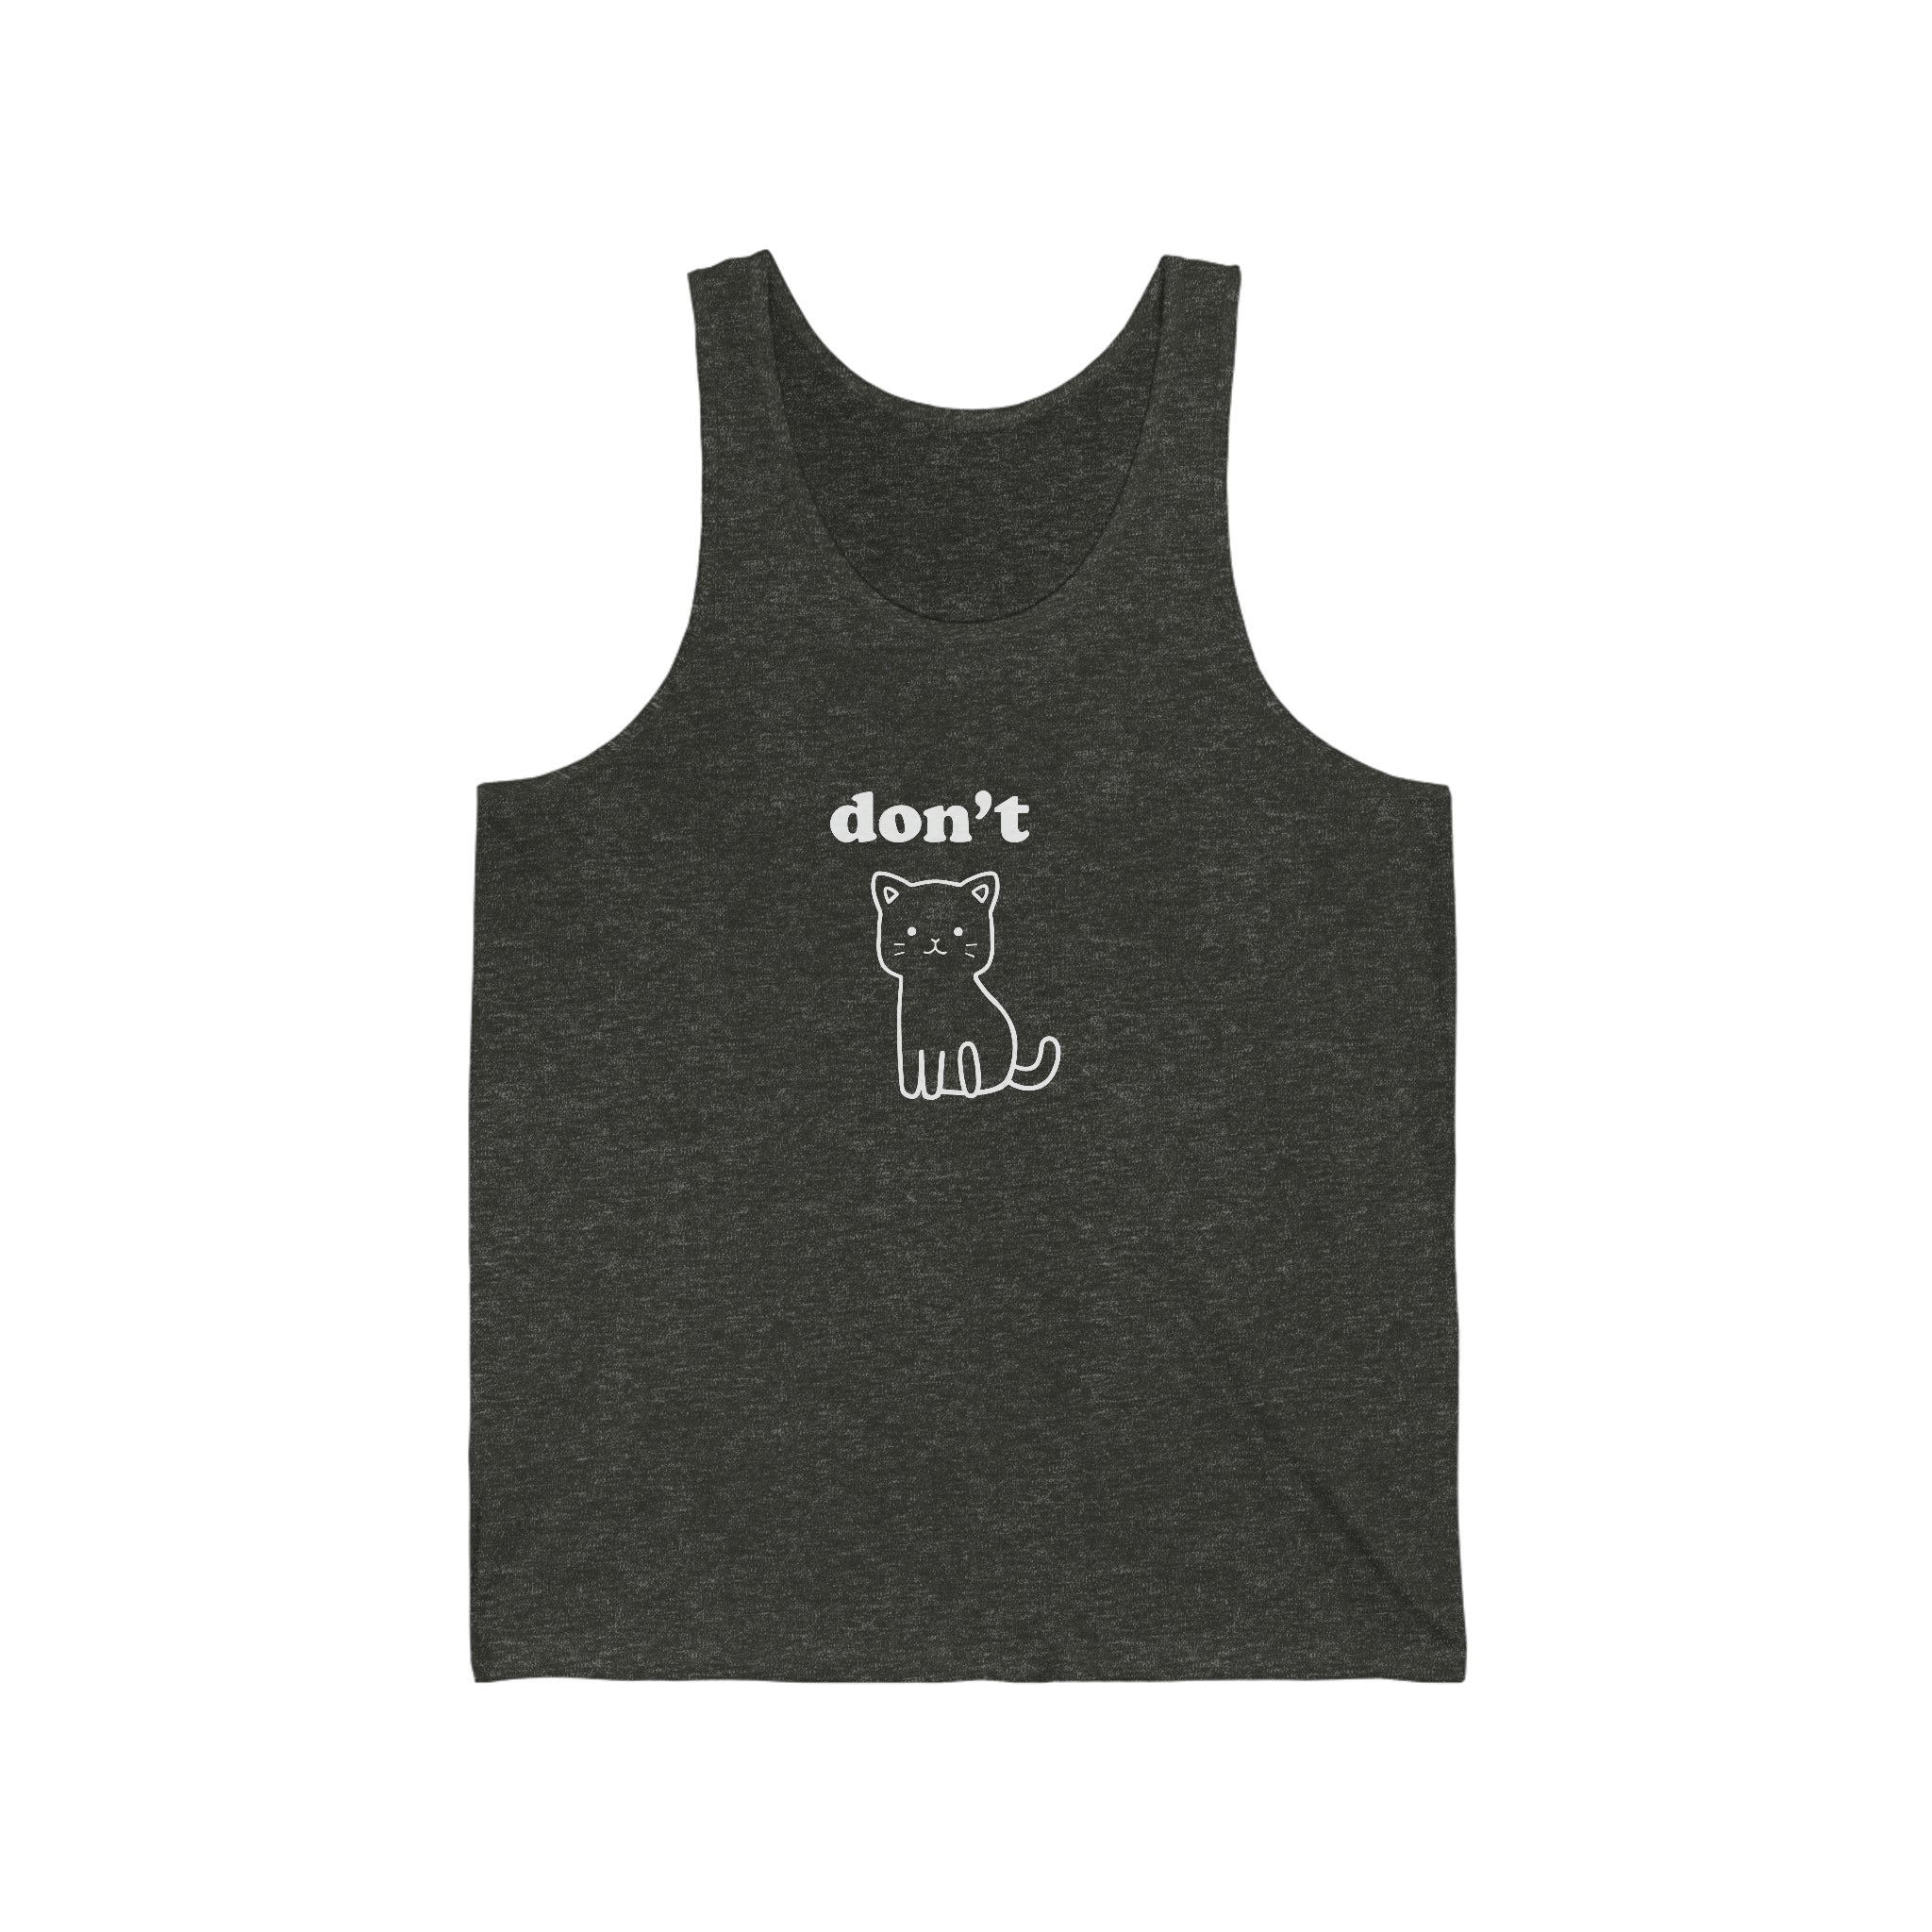 Don't Kitty : Unisex Cotton Tank Top by Bella+Canvas